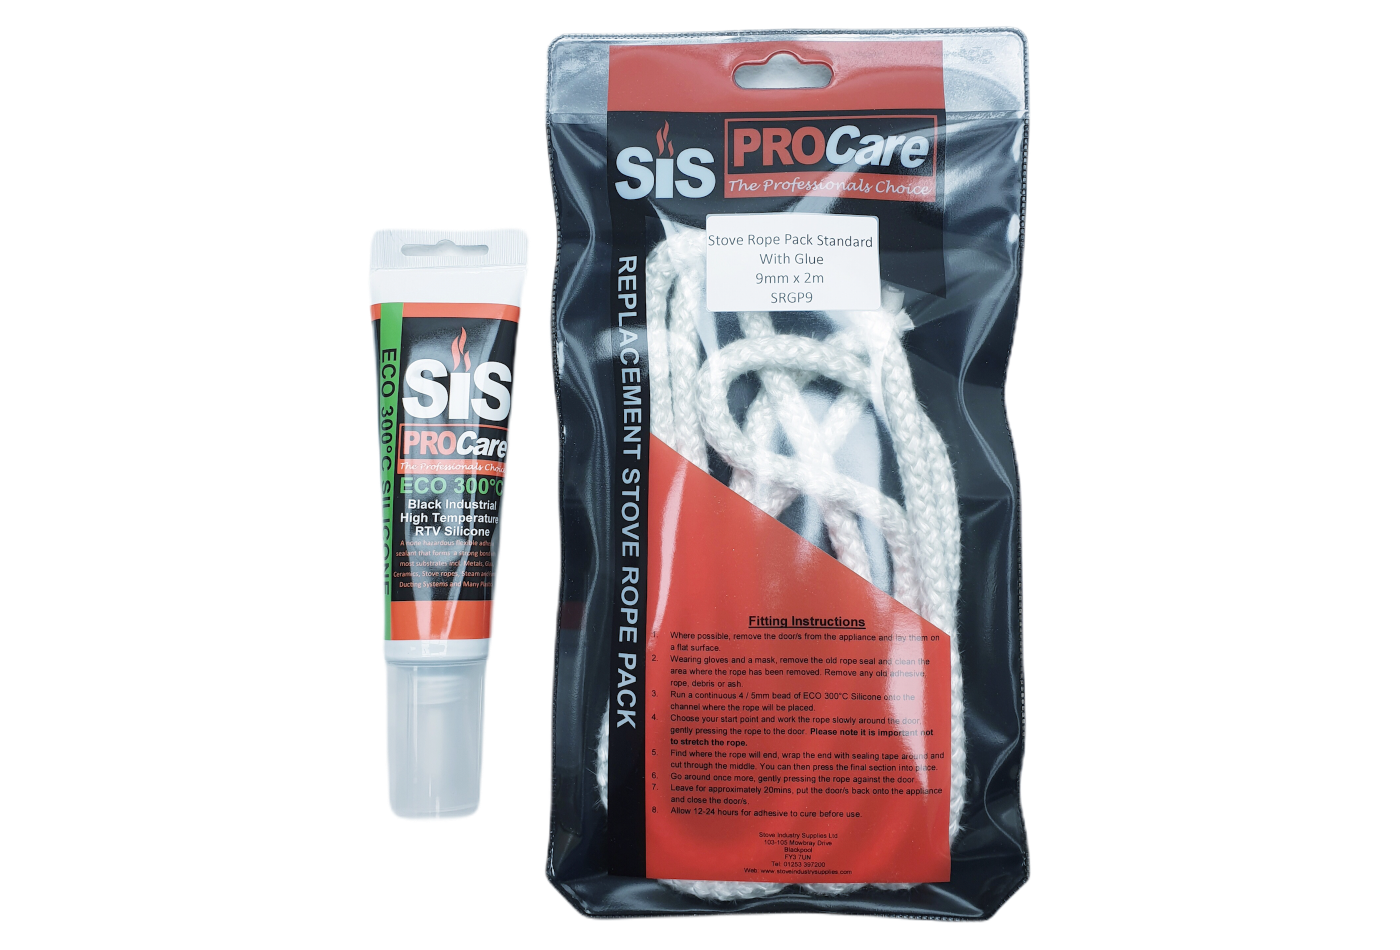 SiS Procare White 9 milimetre x 2 metre Standard Stove Rope & 80 millilitre Rope Glue Pack - product code SRGP9